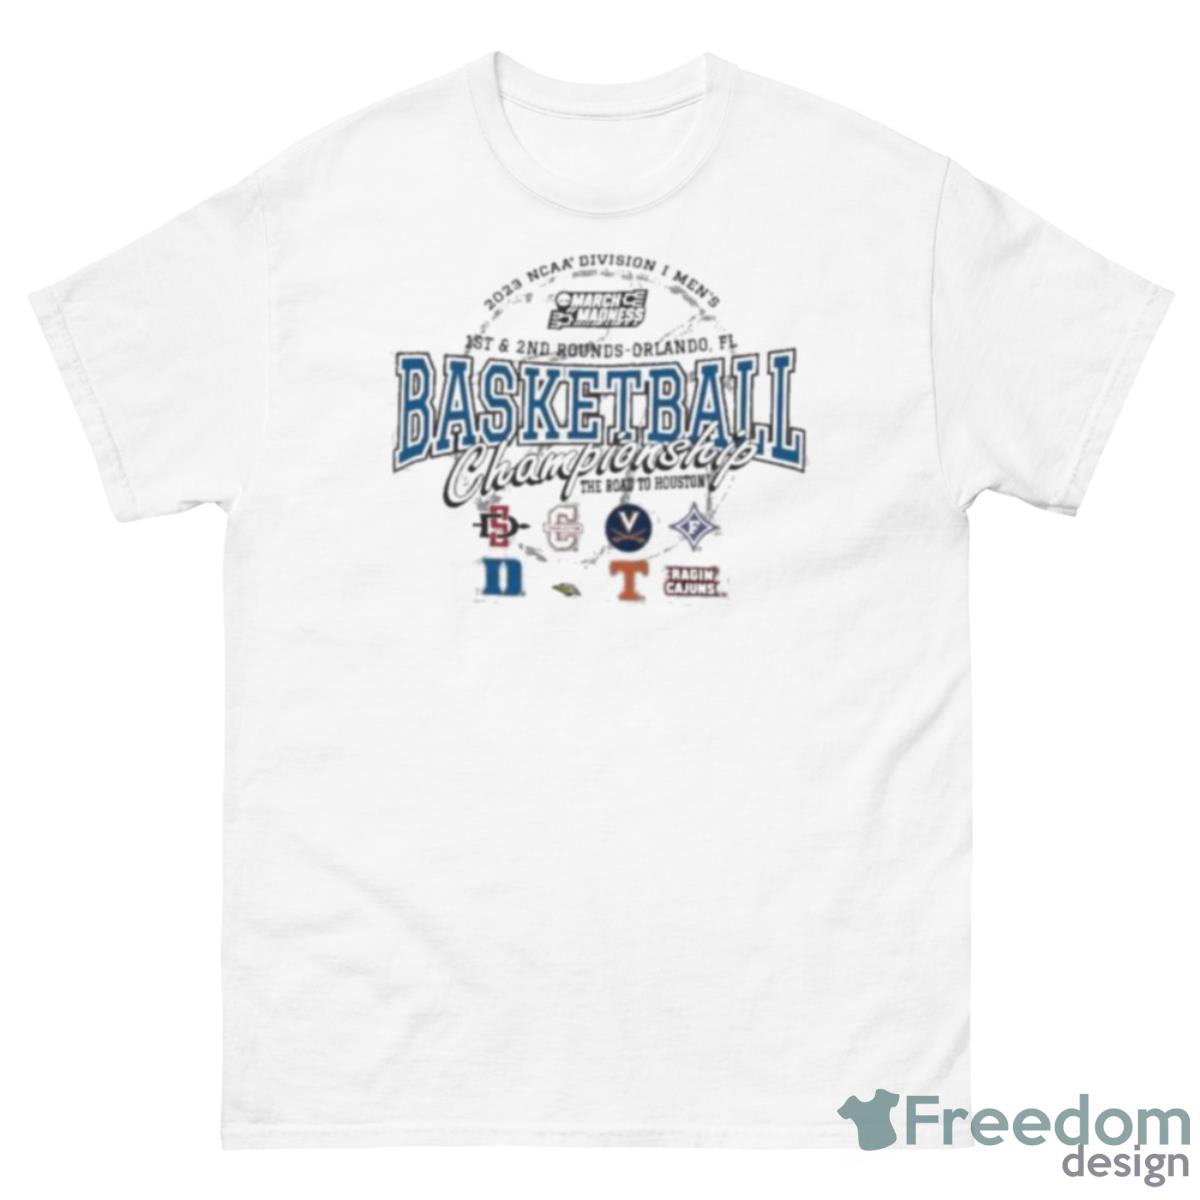 2023 NCAA Division I Men’s Basketball 1st & 2nd Rounds Orlando The Road To Houston Shirt - 500 Men’s Classic Tee Gildan